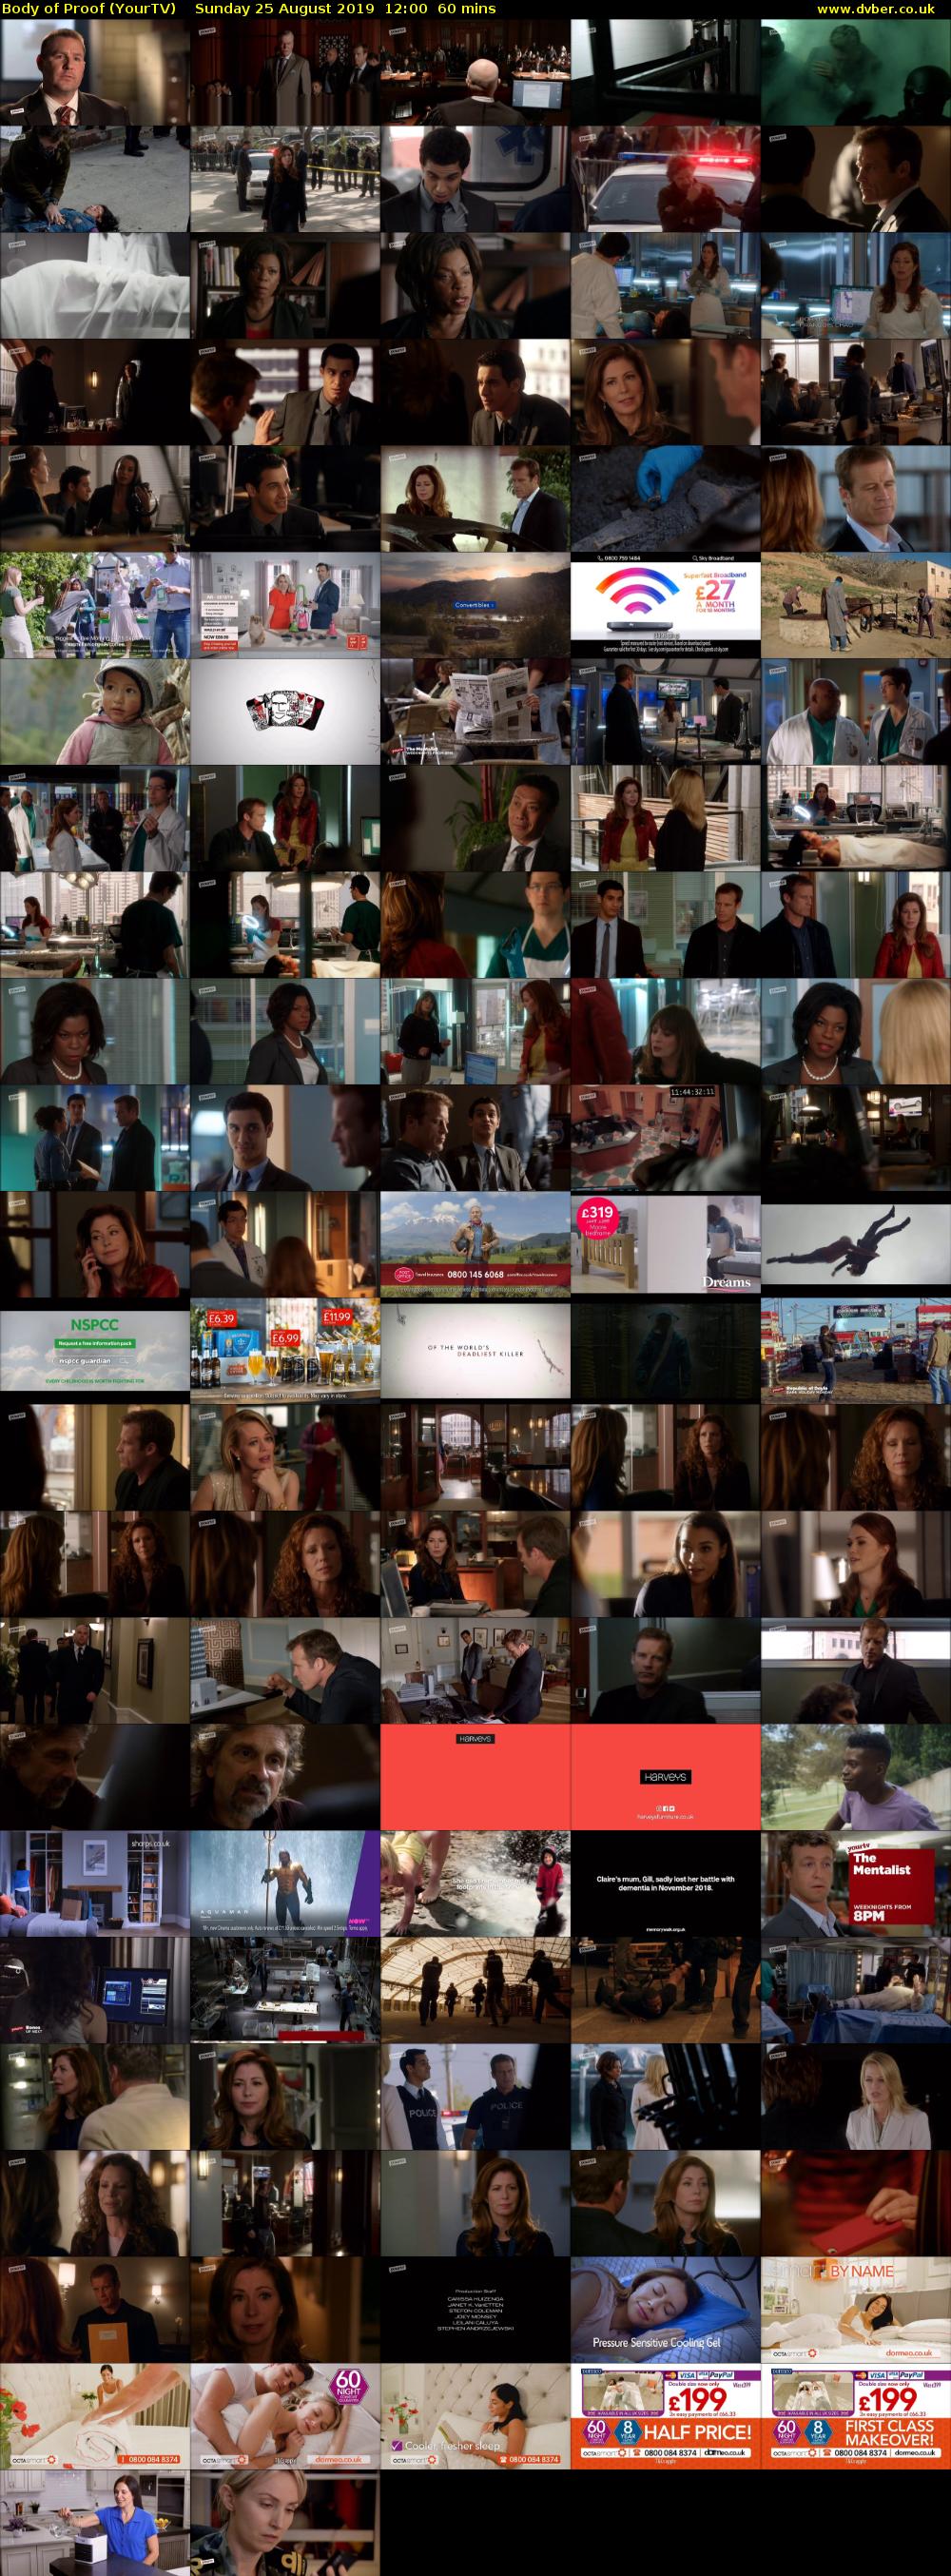 Body of Proof (YourTV) Sunday 25 August 2019 12:00 - 13:00